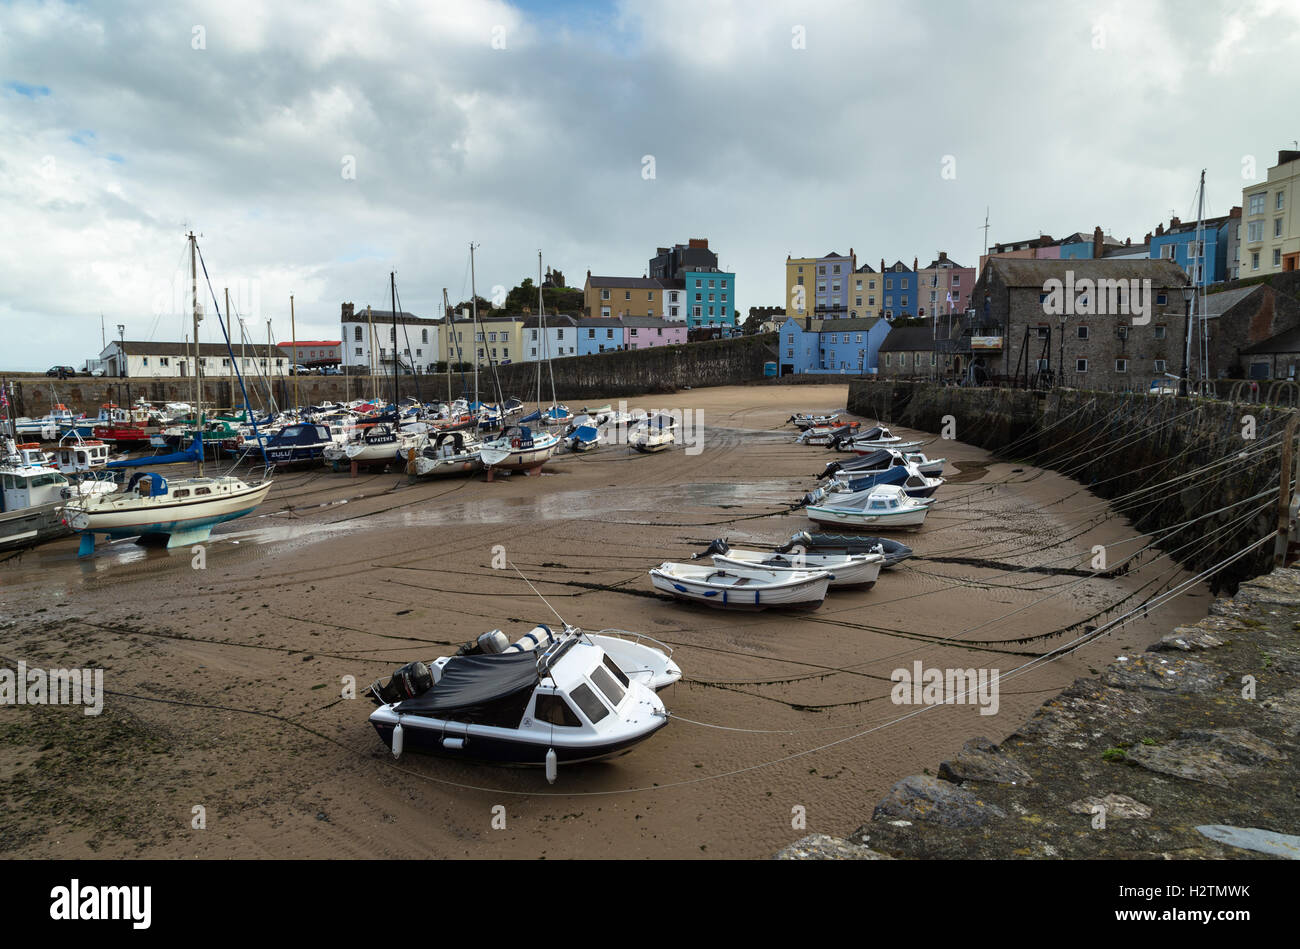 Landscape photo of small fishing boats and dinghies awaiting next incoming tide in Tenby Harbour, Pembrokeshire, Wales Stock Photo